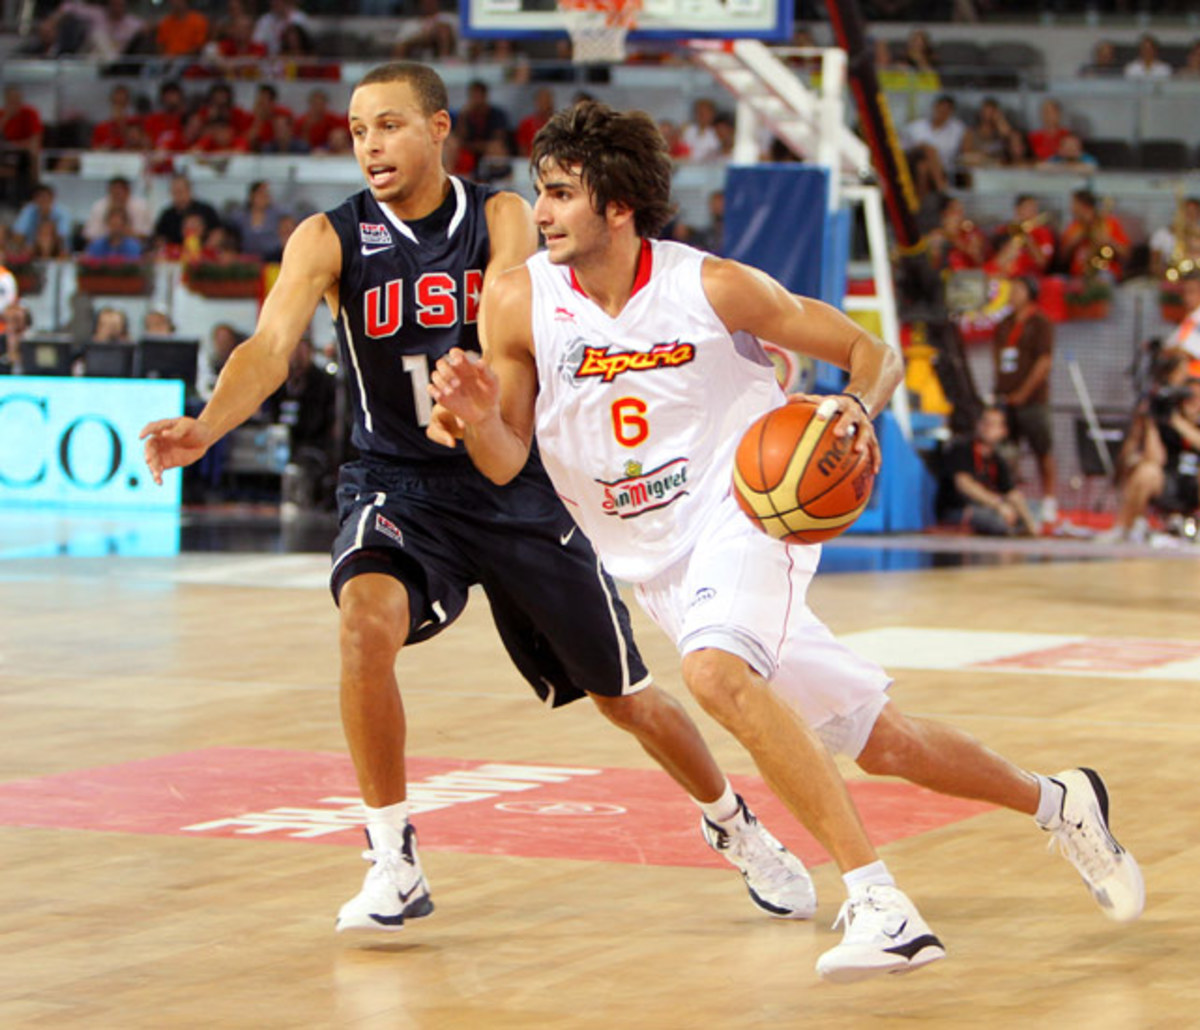 Ricky Rubio to miss FIBA World Cup during break from basketball